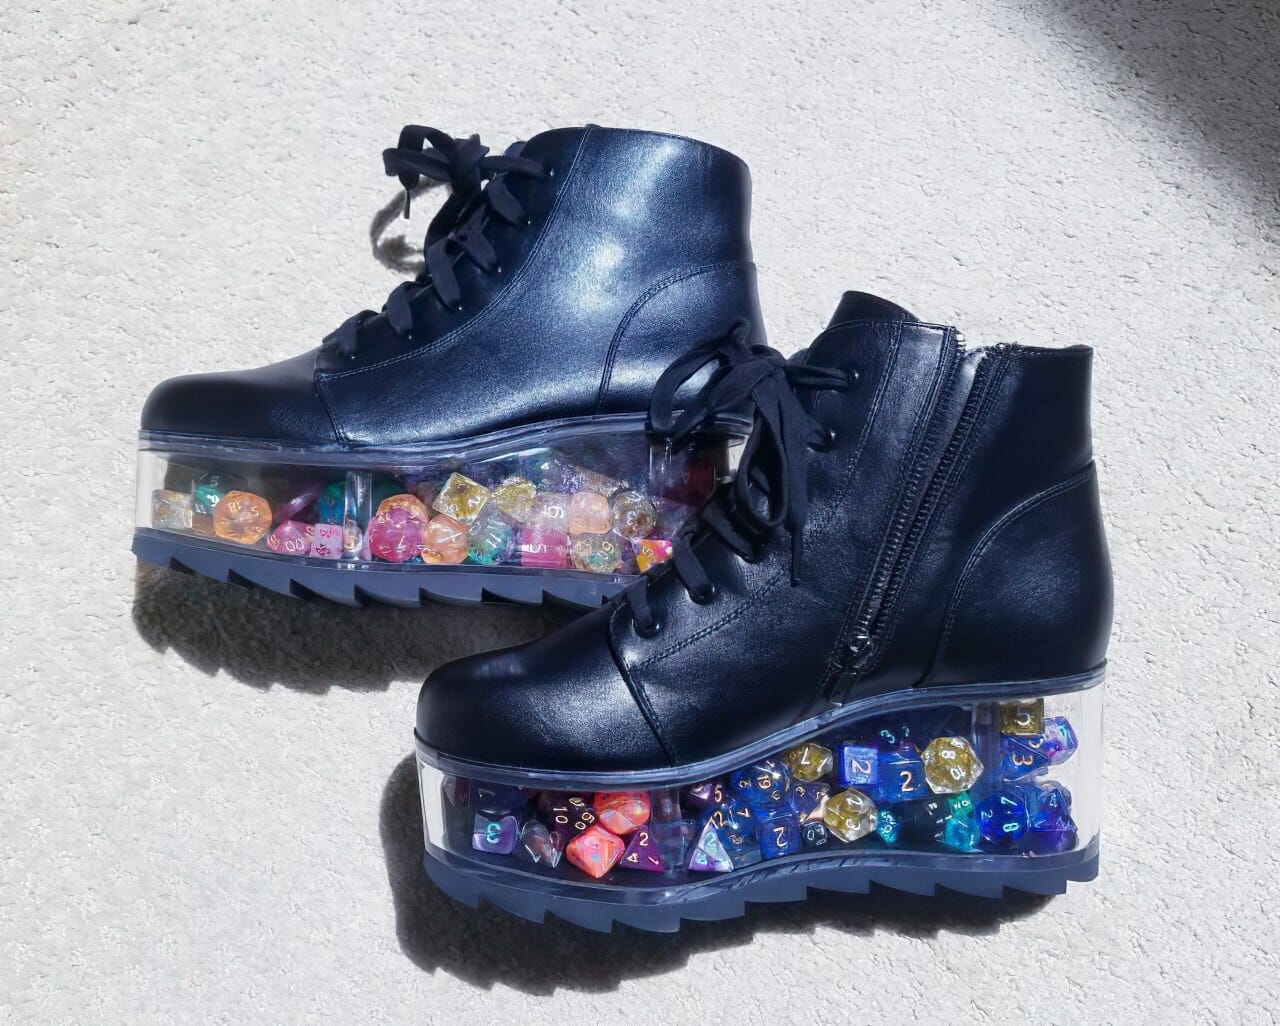 Dice boots